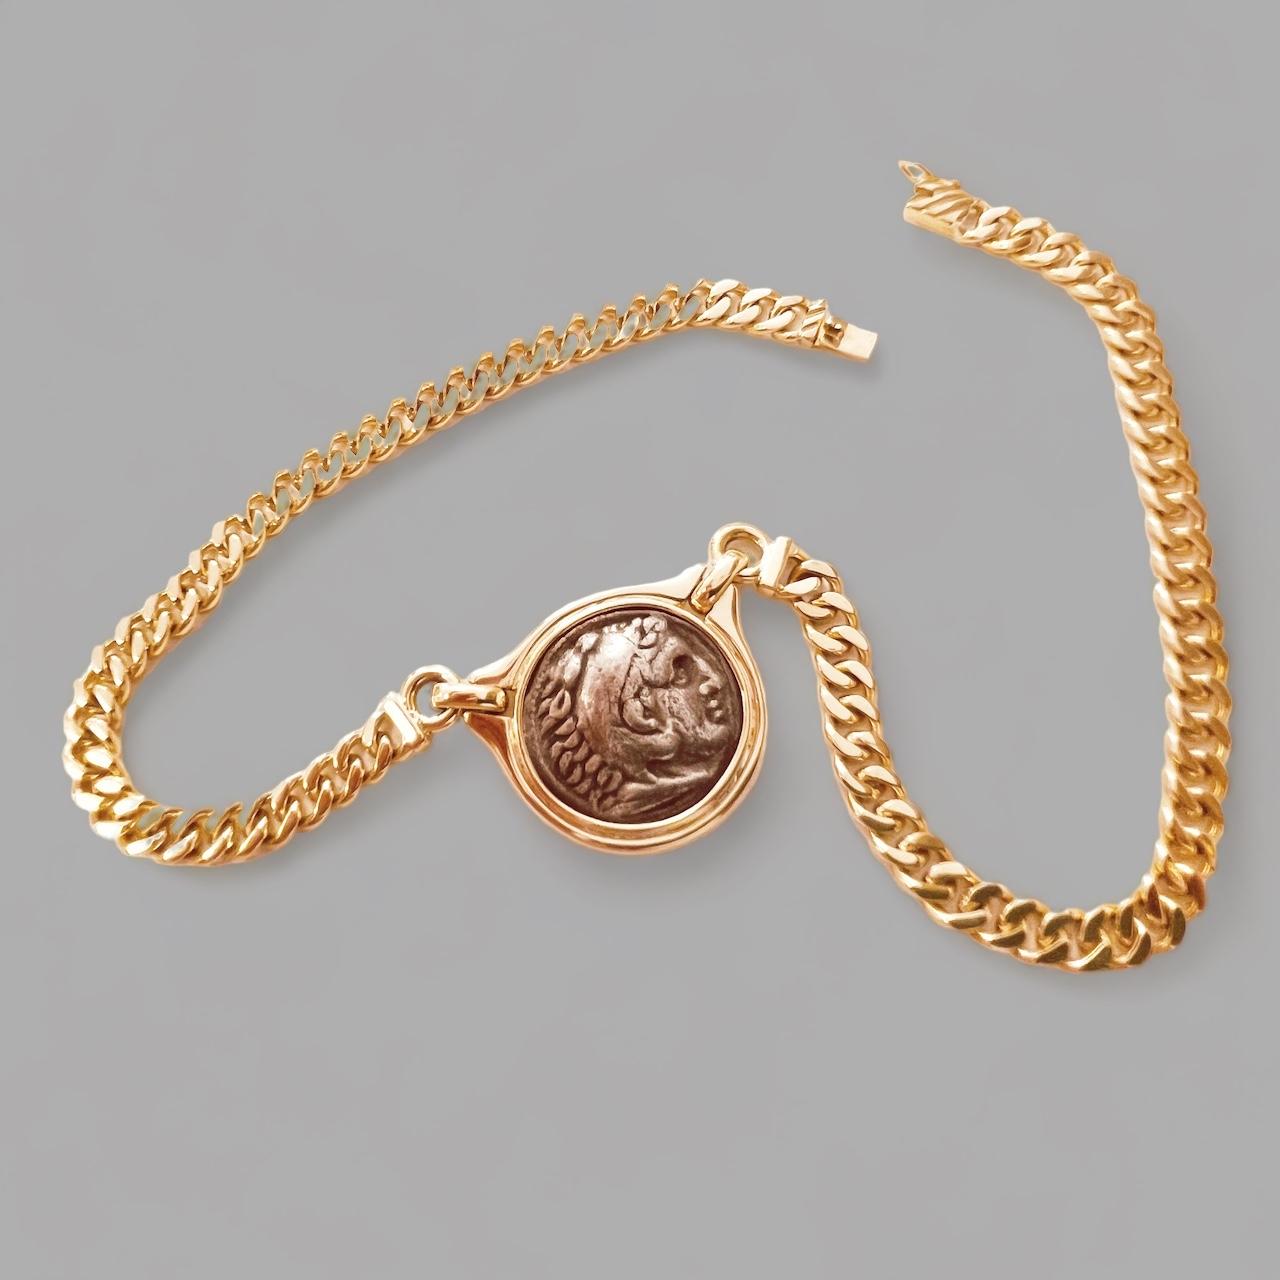 18ct Gold Link Necklace Centring A Reproduction Of An Antique Greek Silver Coin For Sale 8